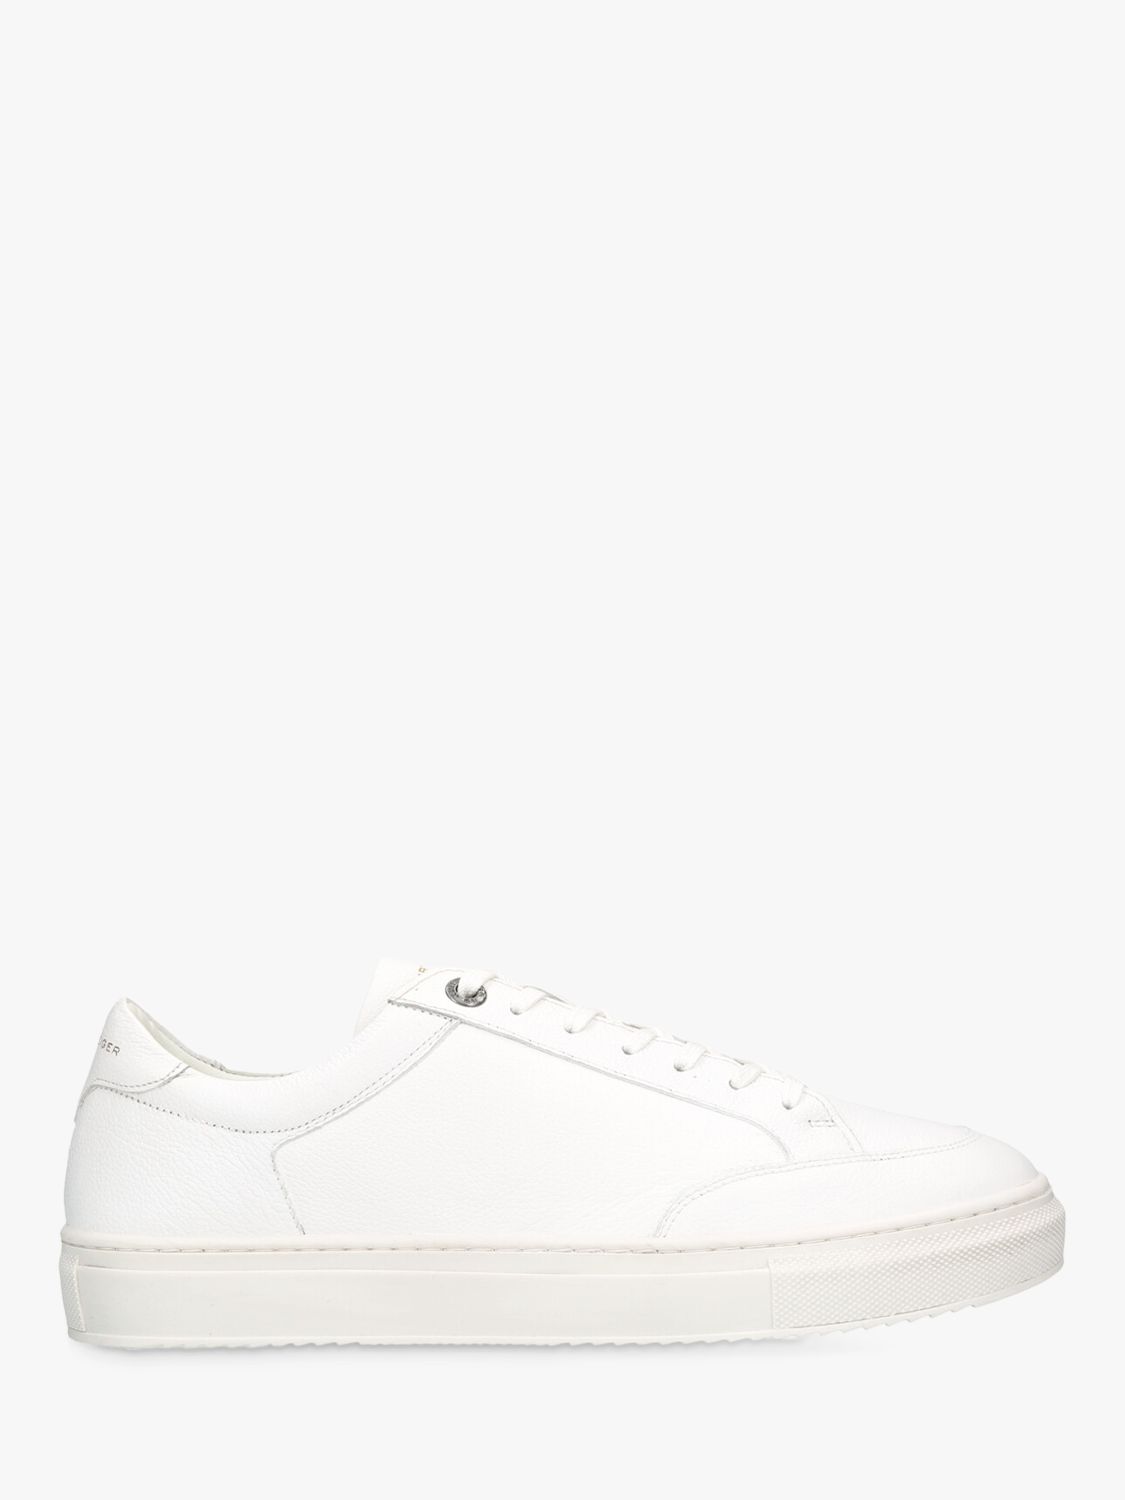 KG Kurt Geiger Hype Leather Trainers, White, 11